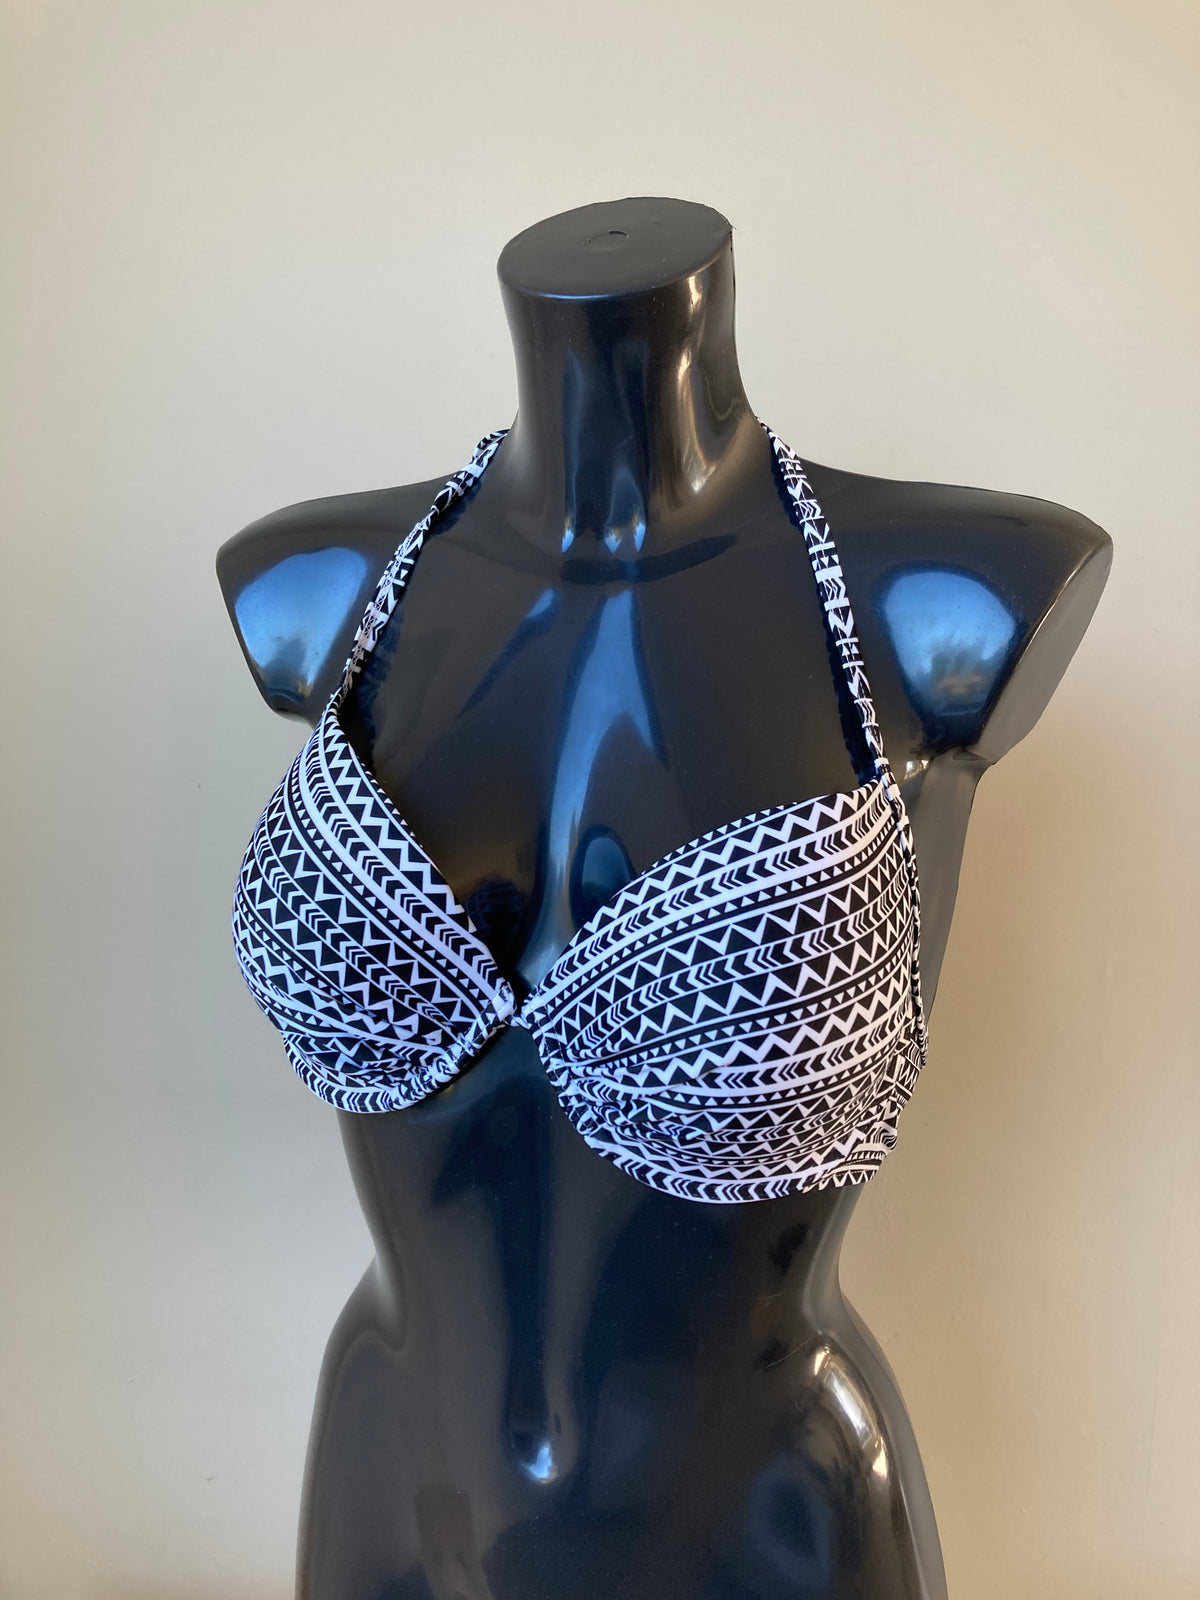 Black/White Push up Top by VENICE BEACH - Size 14C